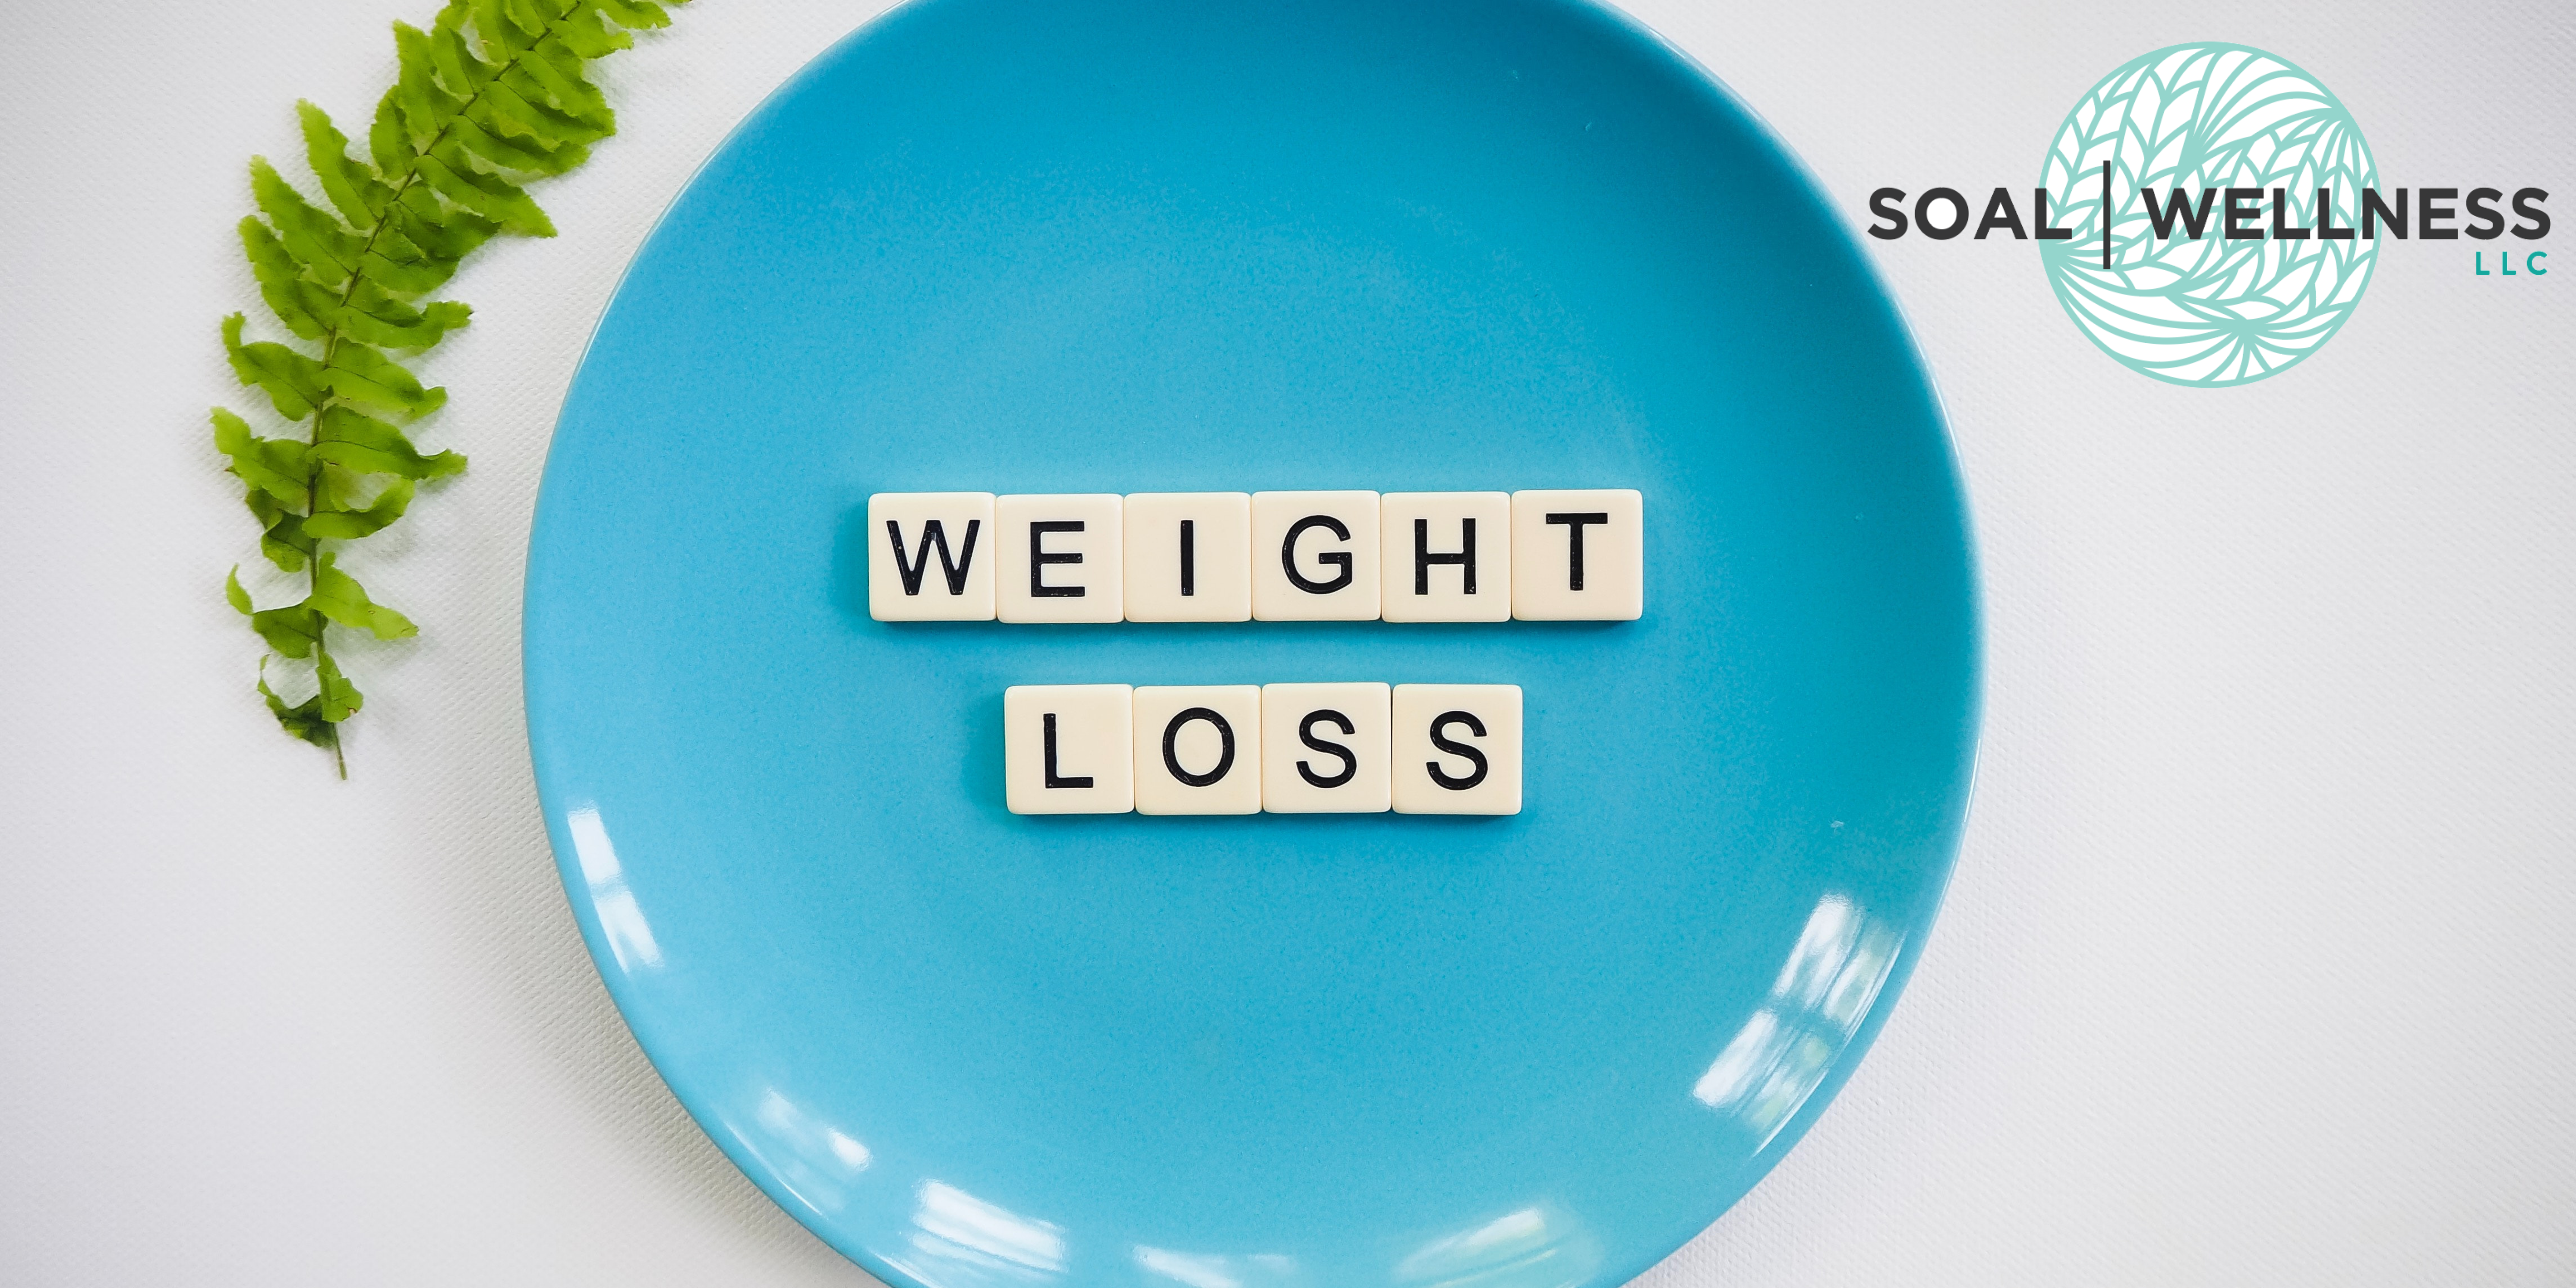 Medical Weight Loss Services in Chandler, AZ